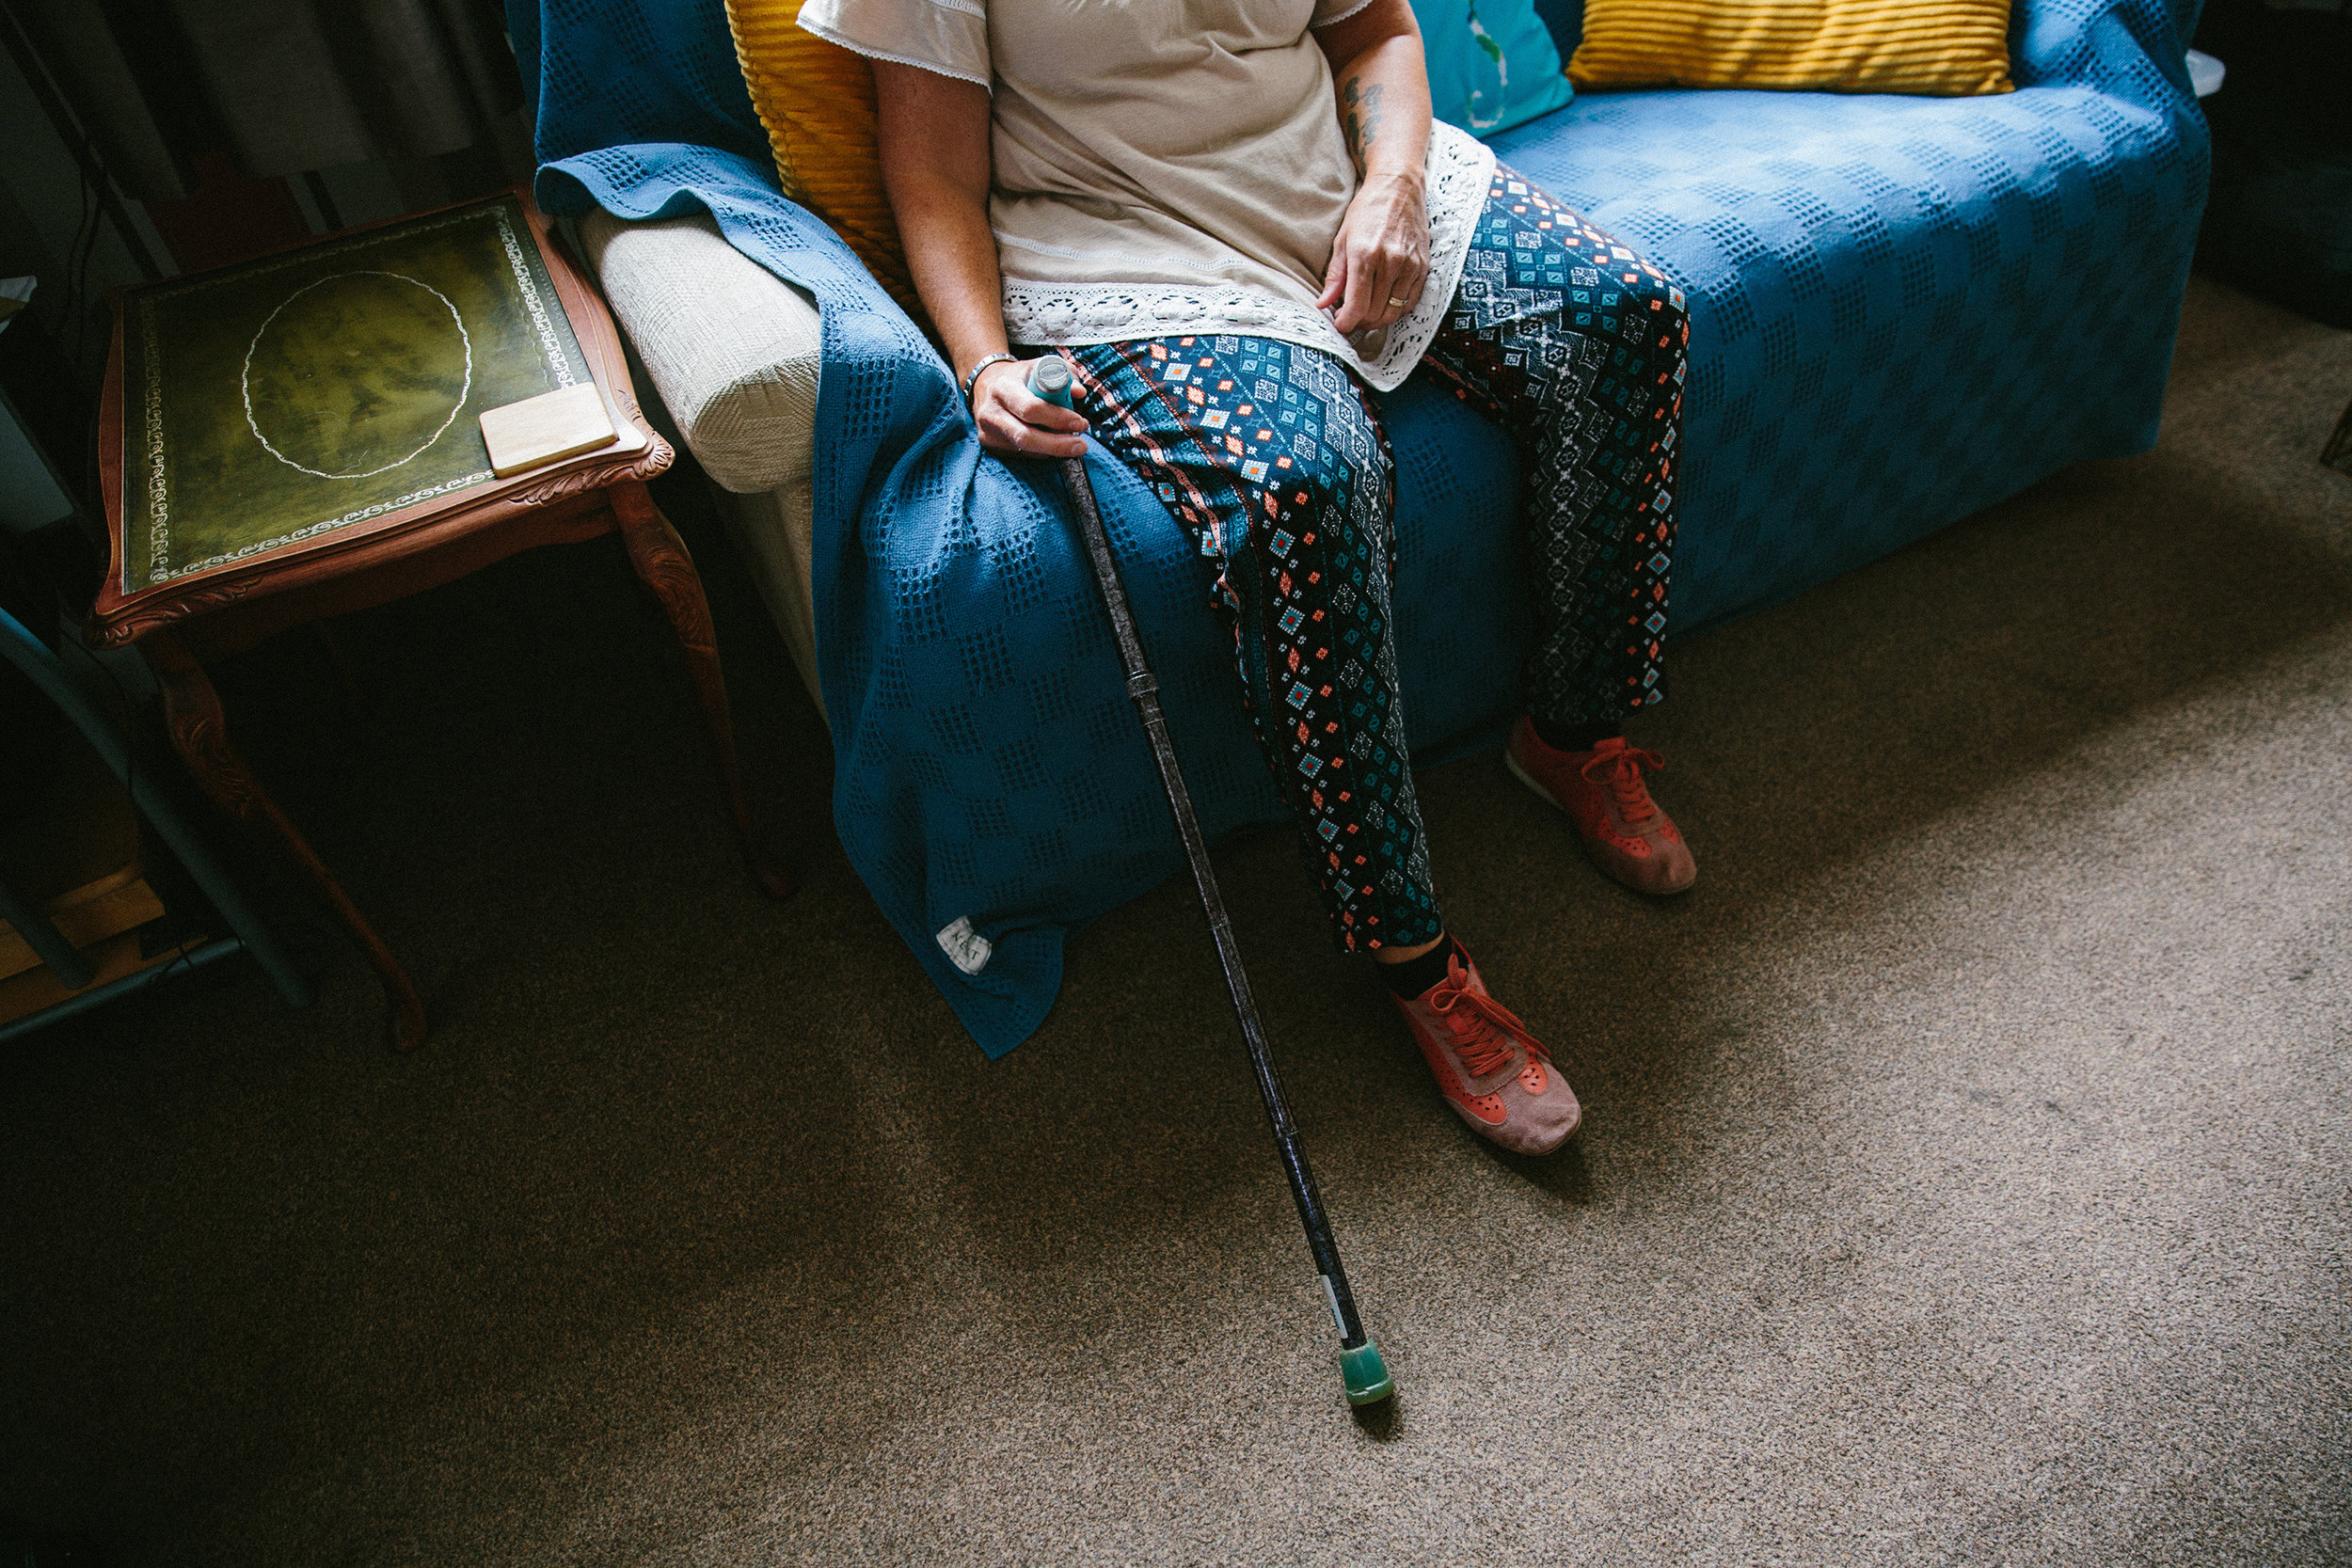  After nearly 13 years Jackie is unable to walk long distances, or to sit for any length of time. She relies on a stick daily, and has to use a mobility scooter for long journeys       